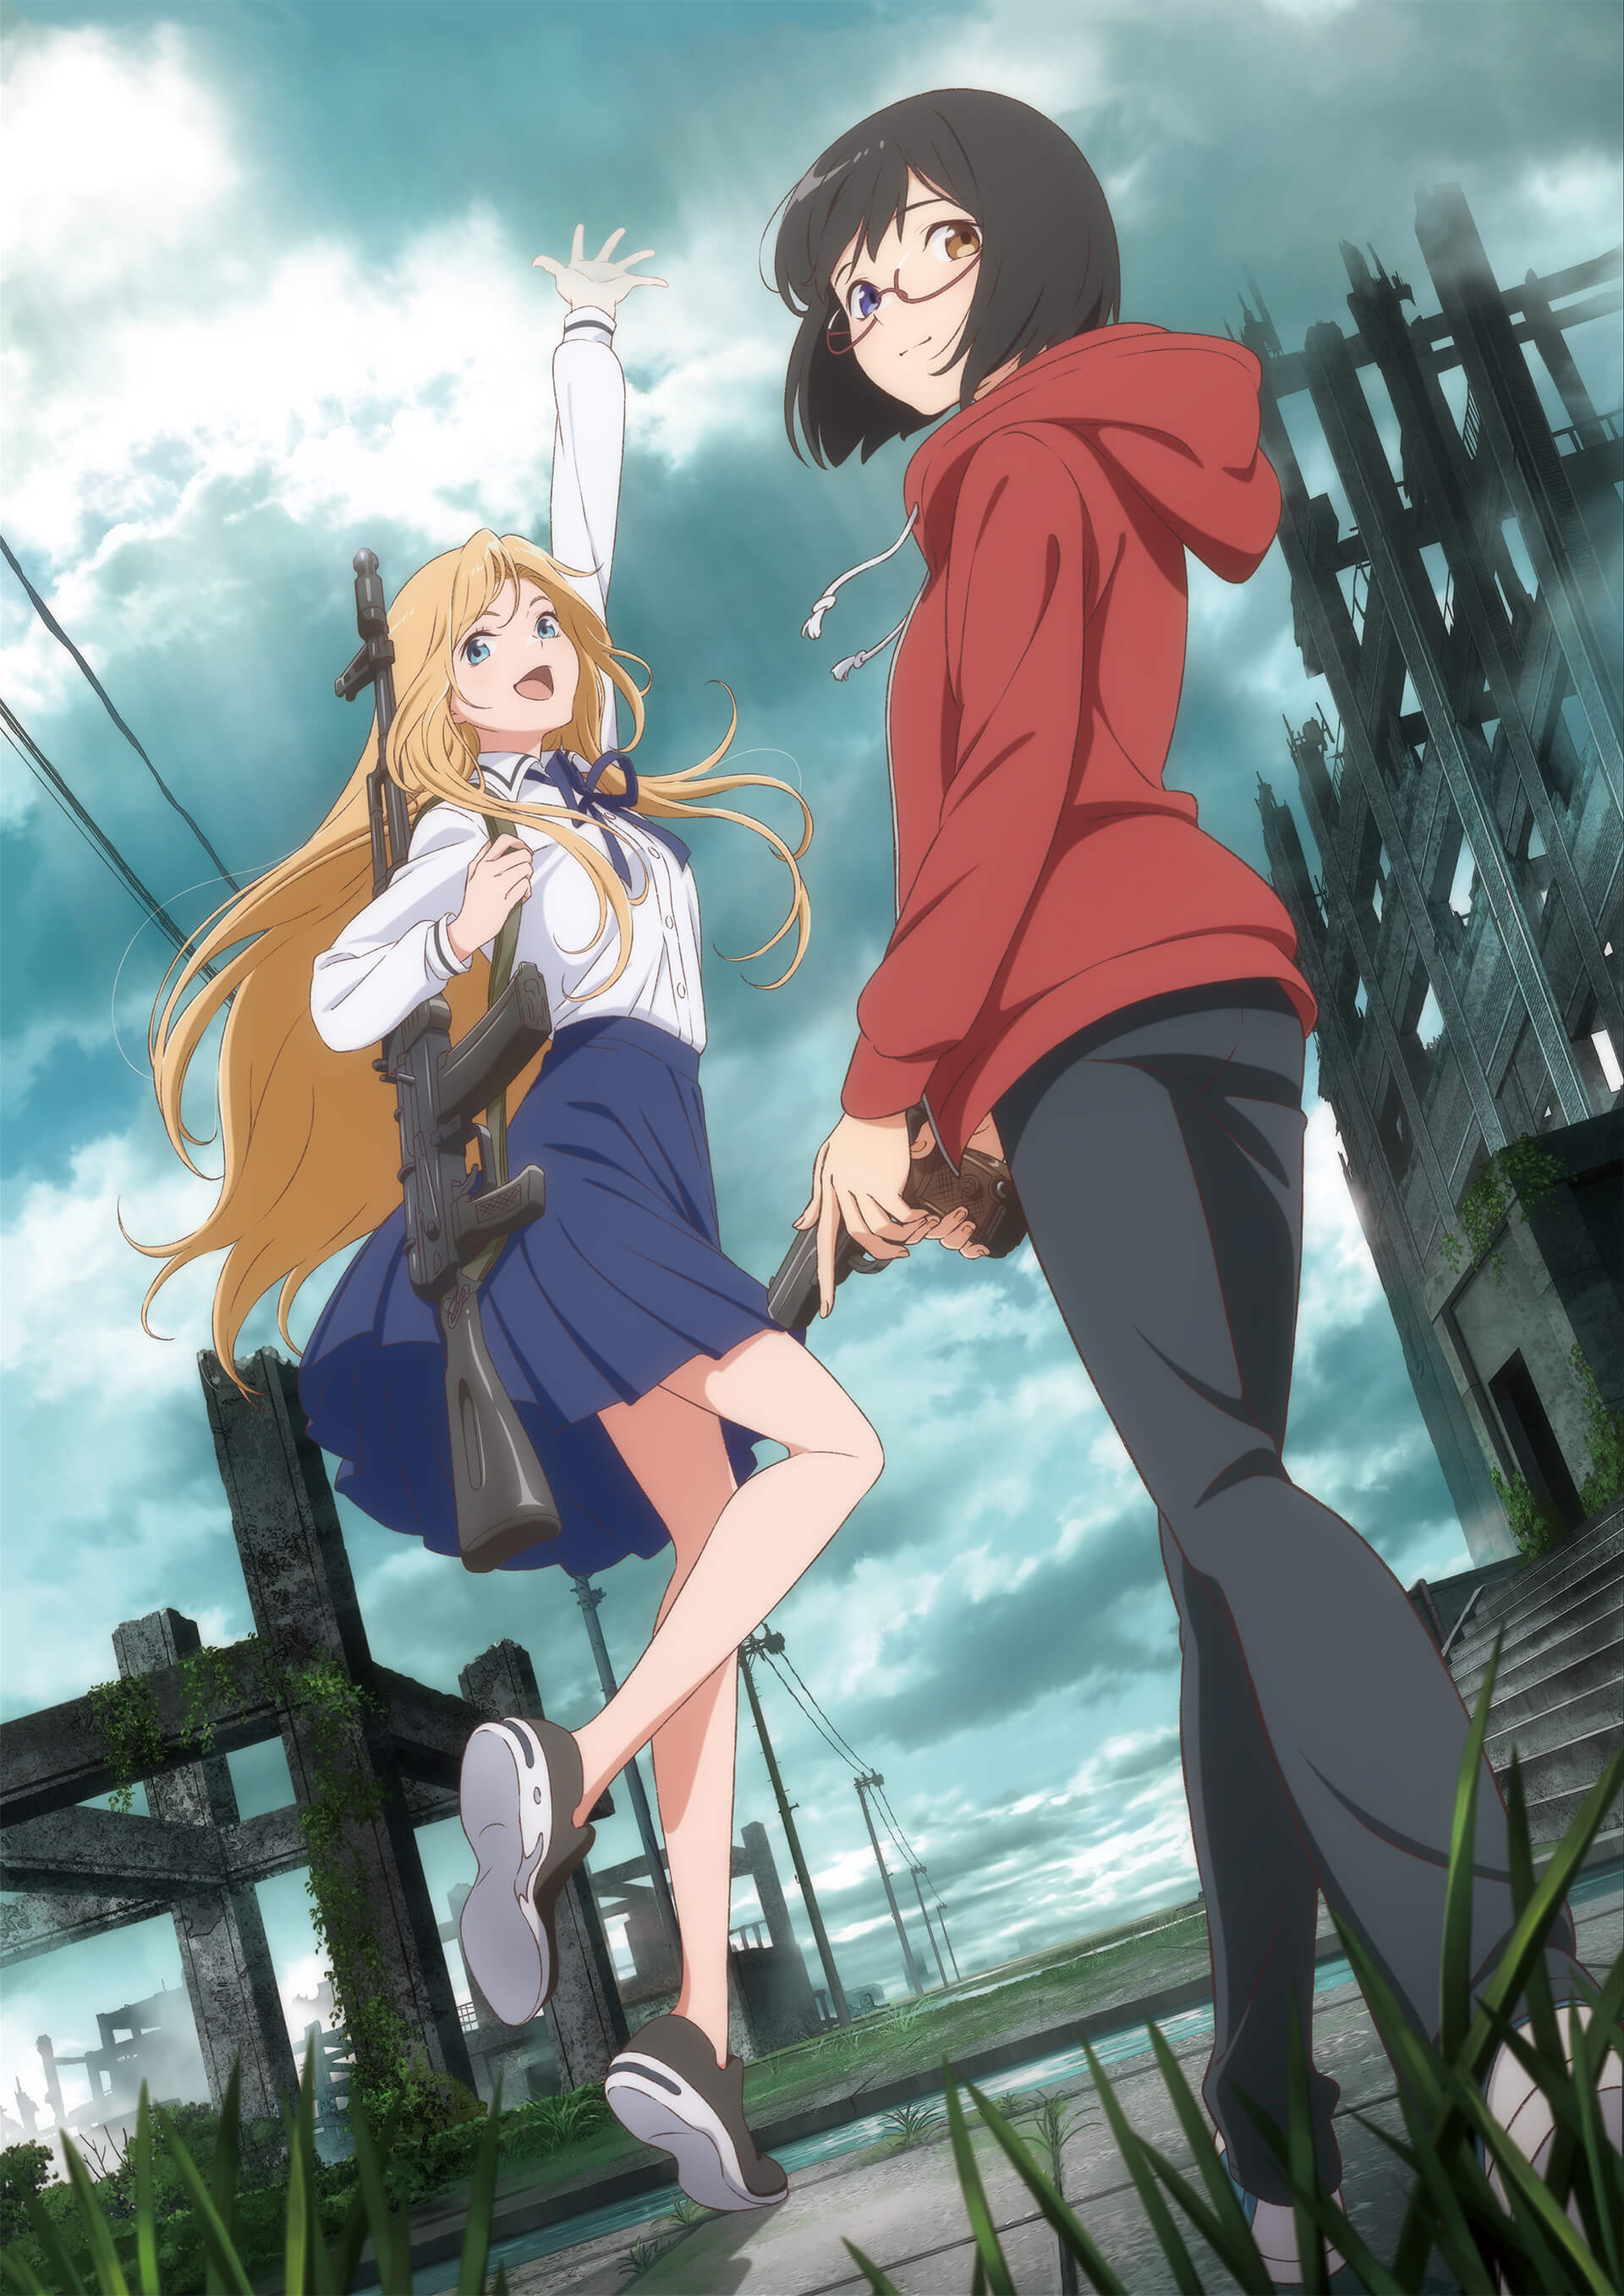 Otherside Picnic Episode 1 Discussion & Gallery - Anime Shelter